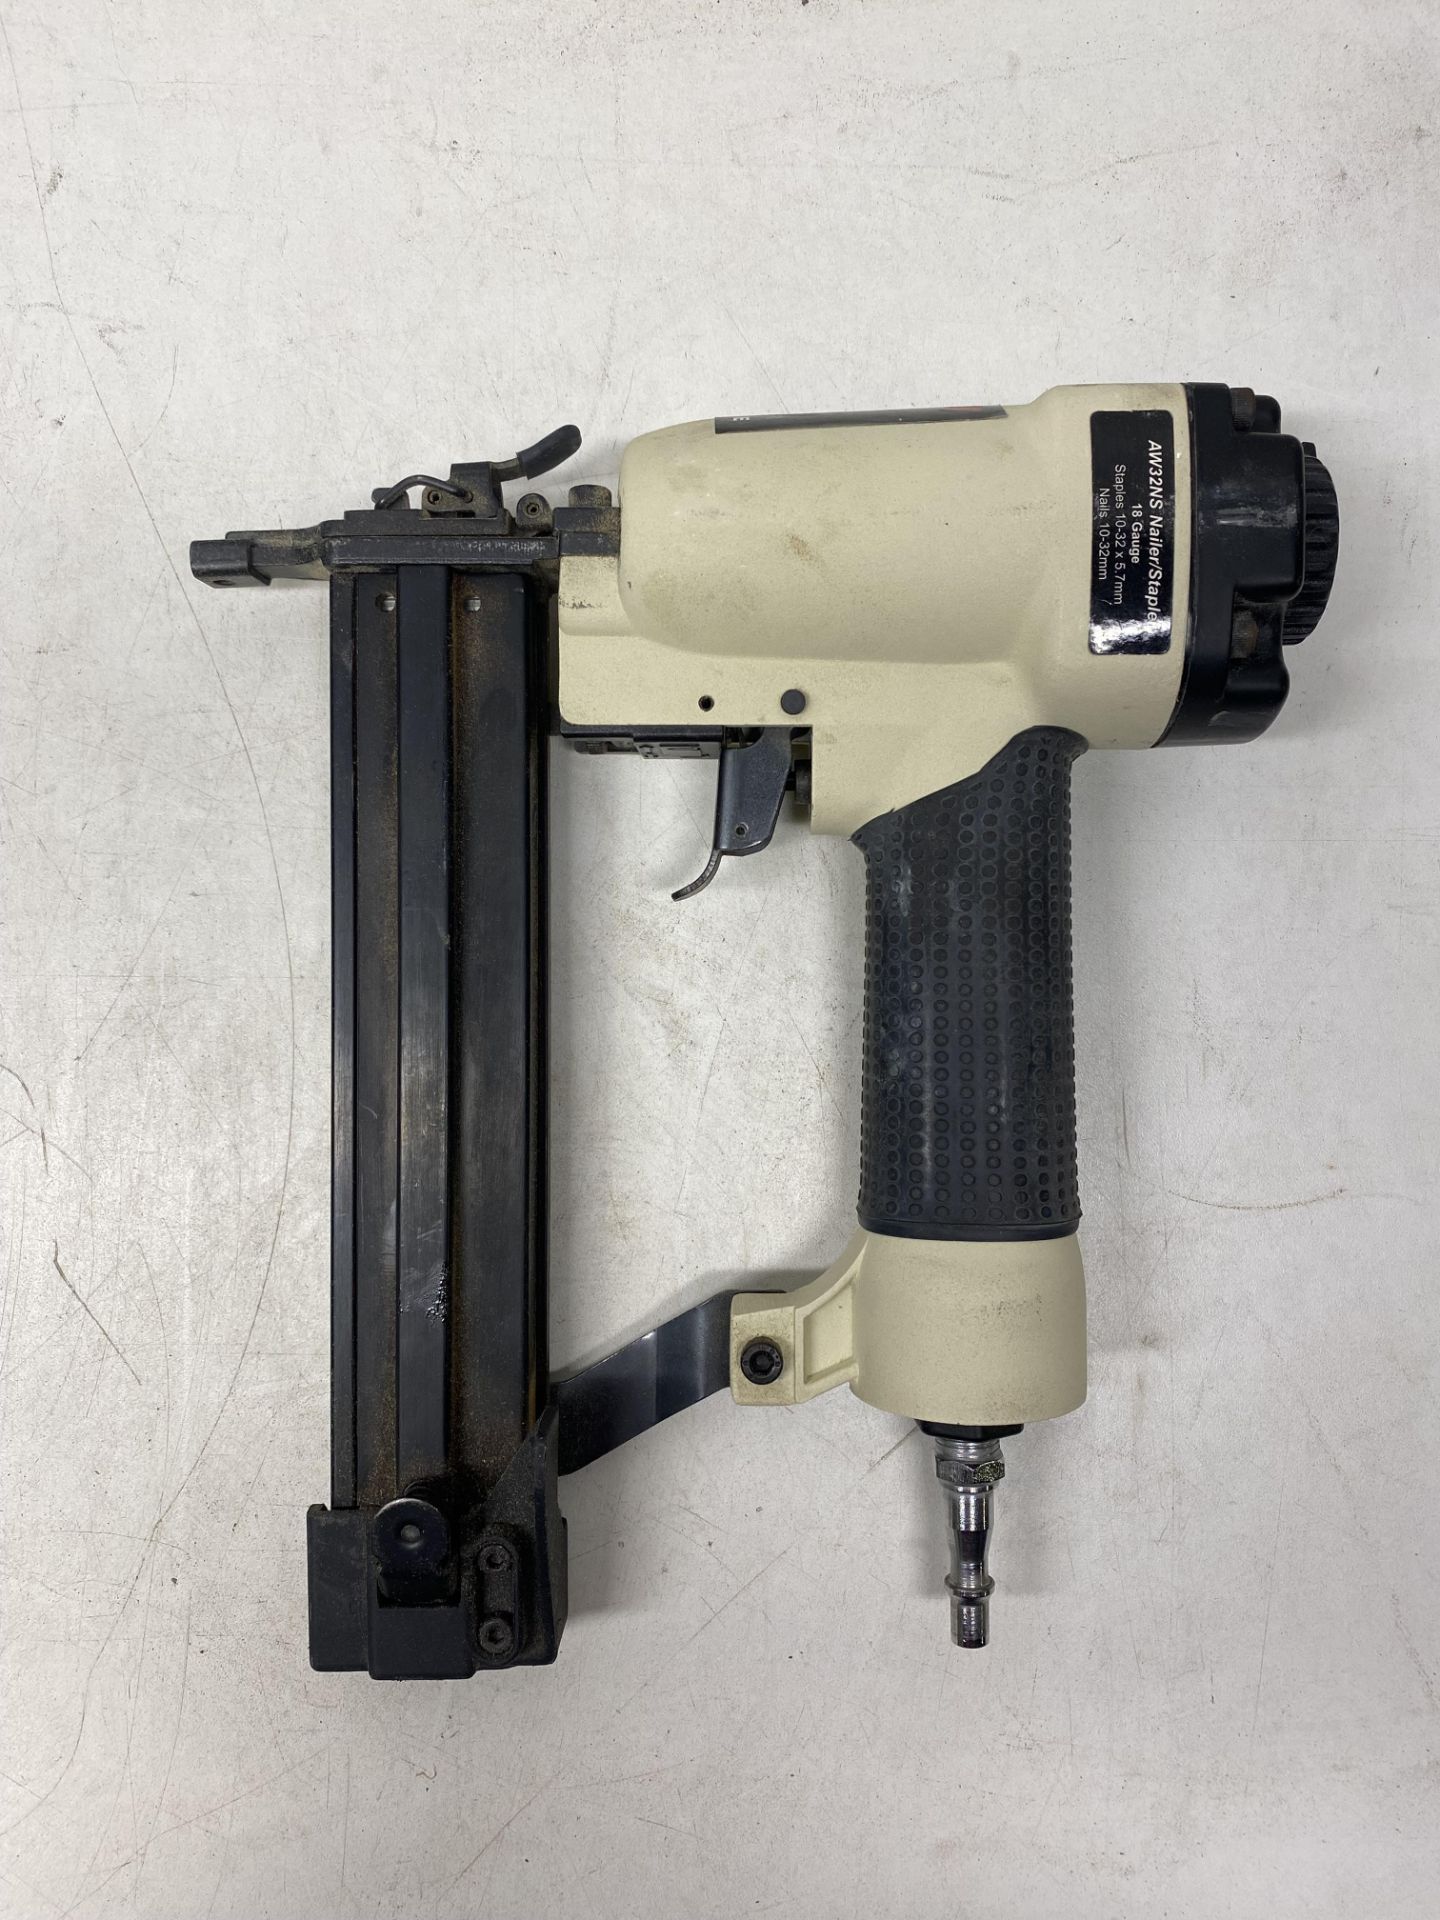 2 x Axminster Air AW32NS Nailers/Staplers - Image 8 of 9